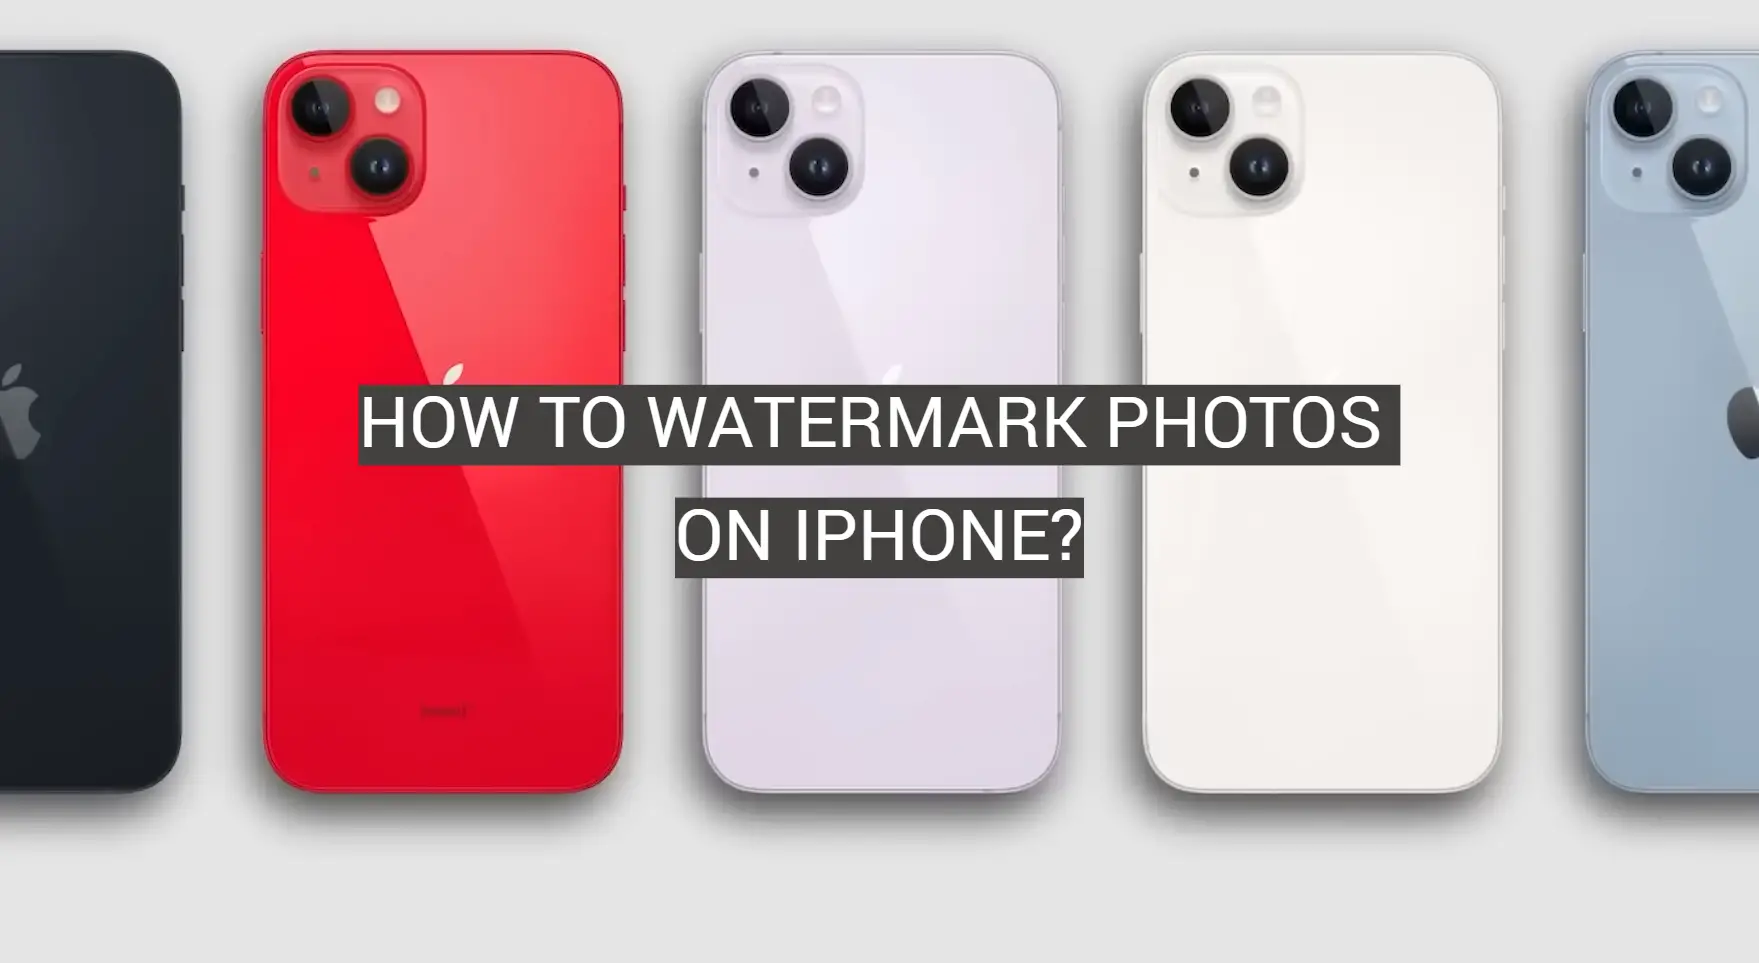 How to Watermark Photos on iPhone?